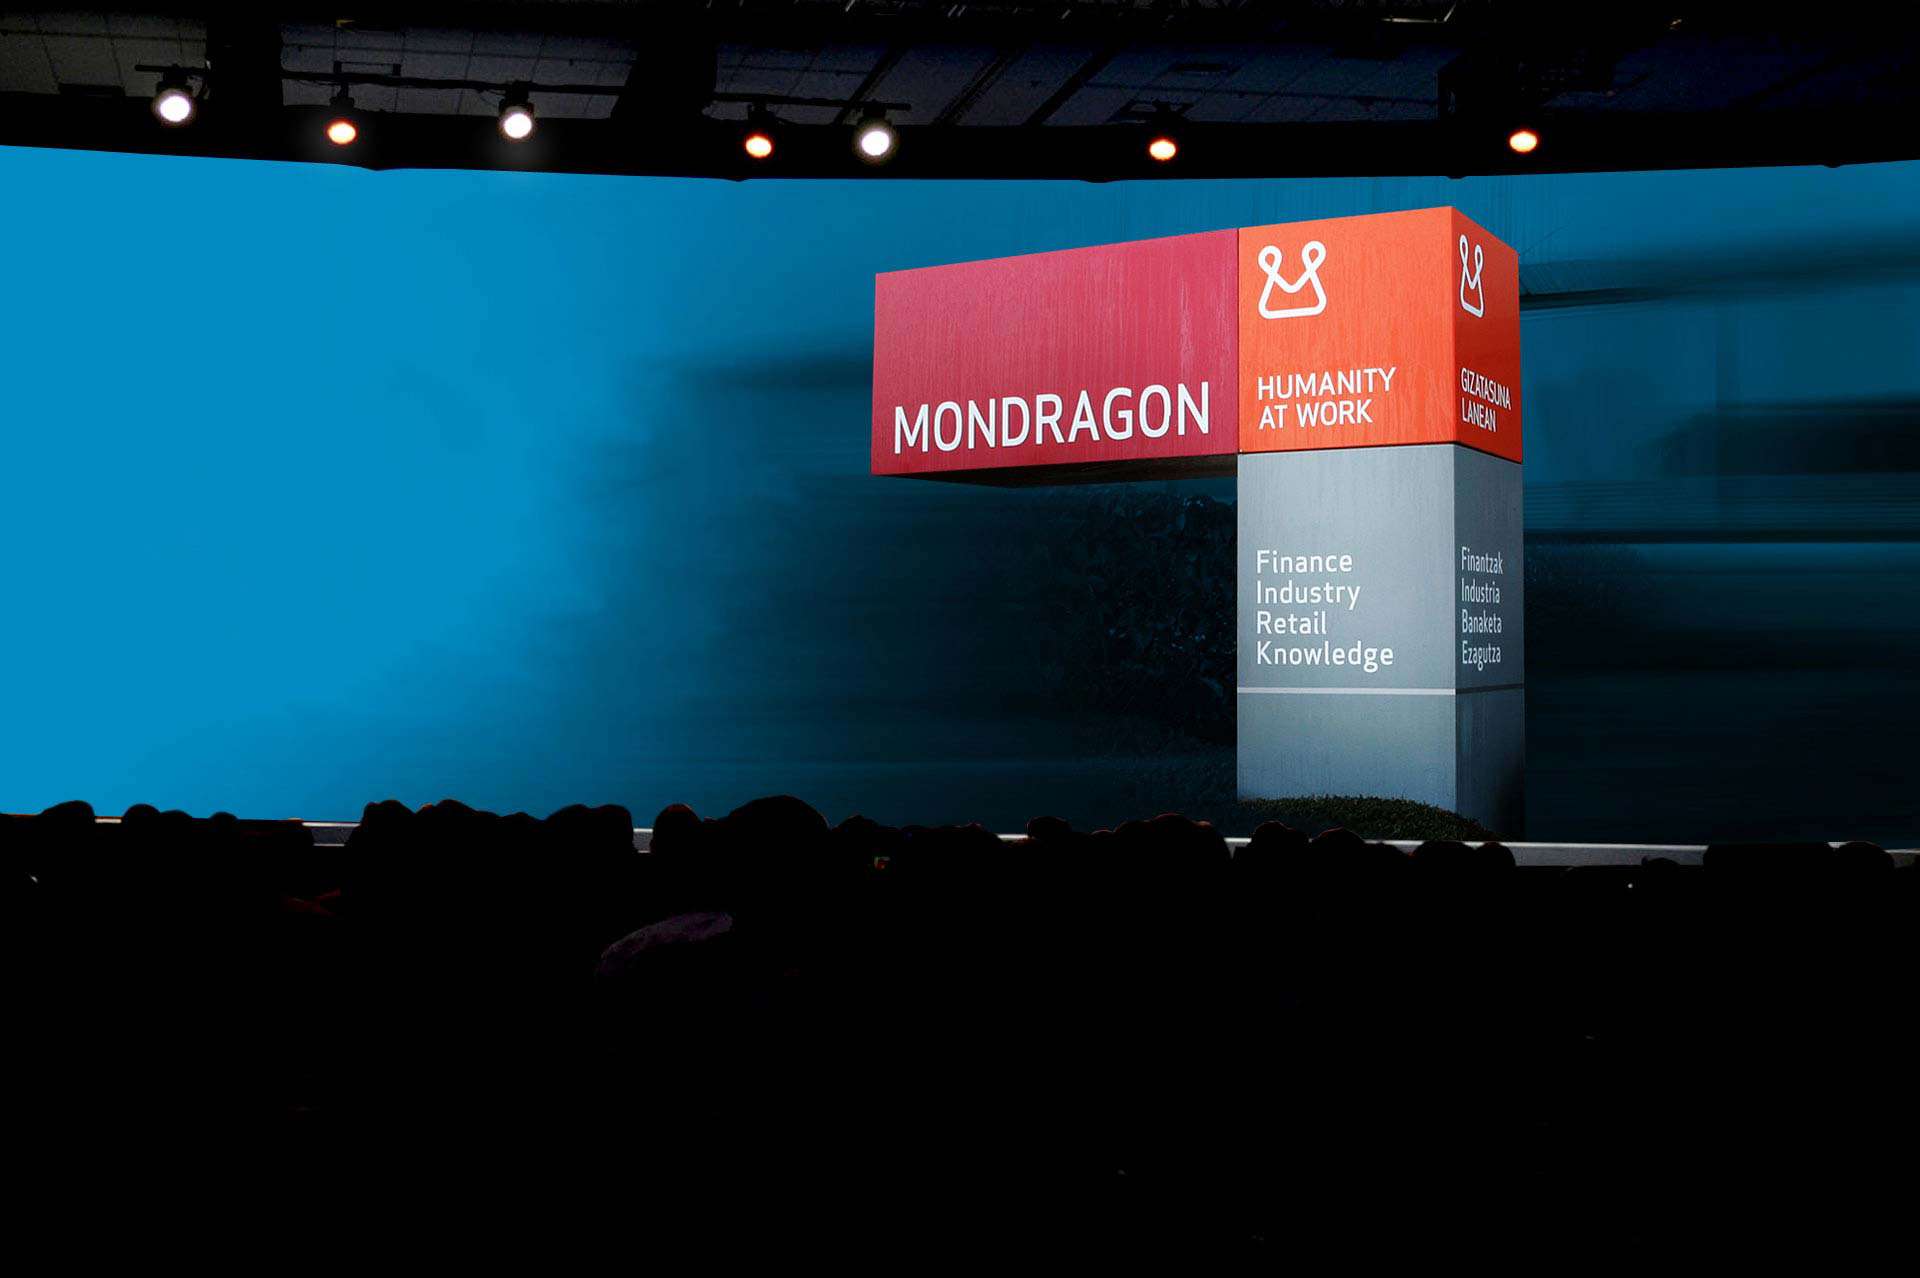 We are part of the MONDRAGON corporation.